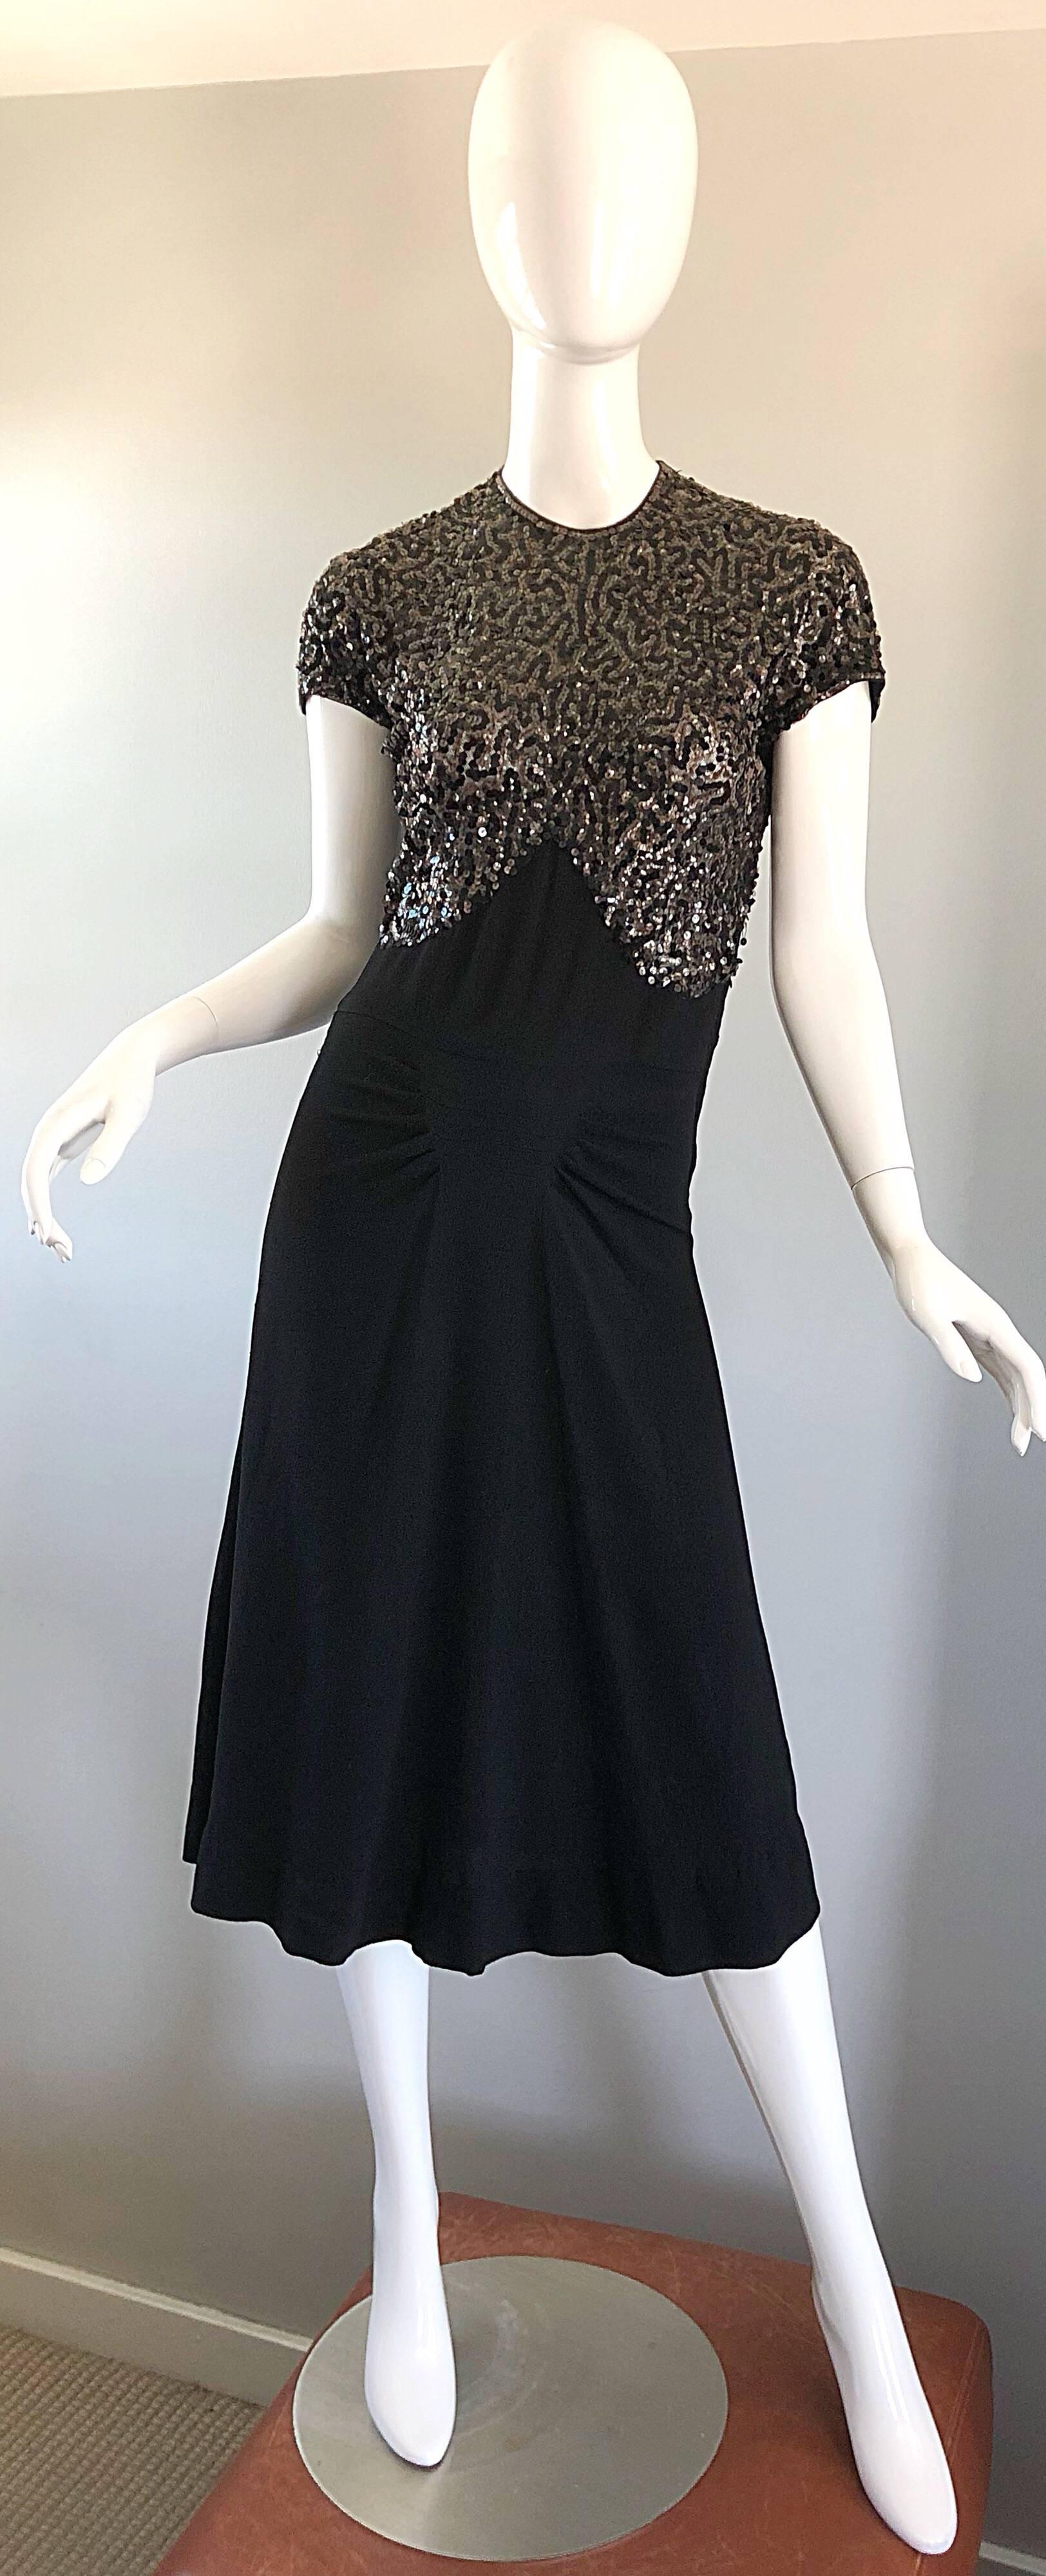 Beautiful 1940s black crepe sequined cocktail dress! Features hundreds of hand-sewn black sequins on the entire front bodice. Free flowy skirt is both flattering and comfortable. Metal zipper up the side. Intricate slimming pleated detail at the